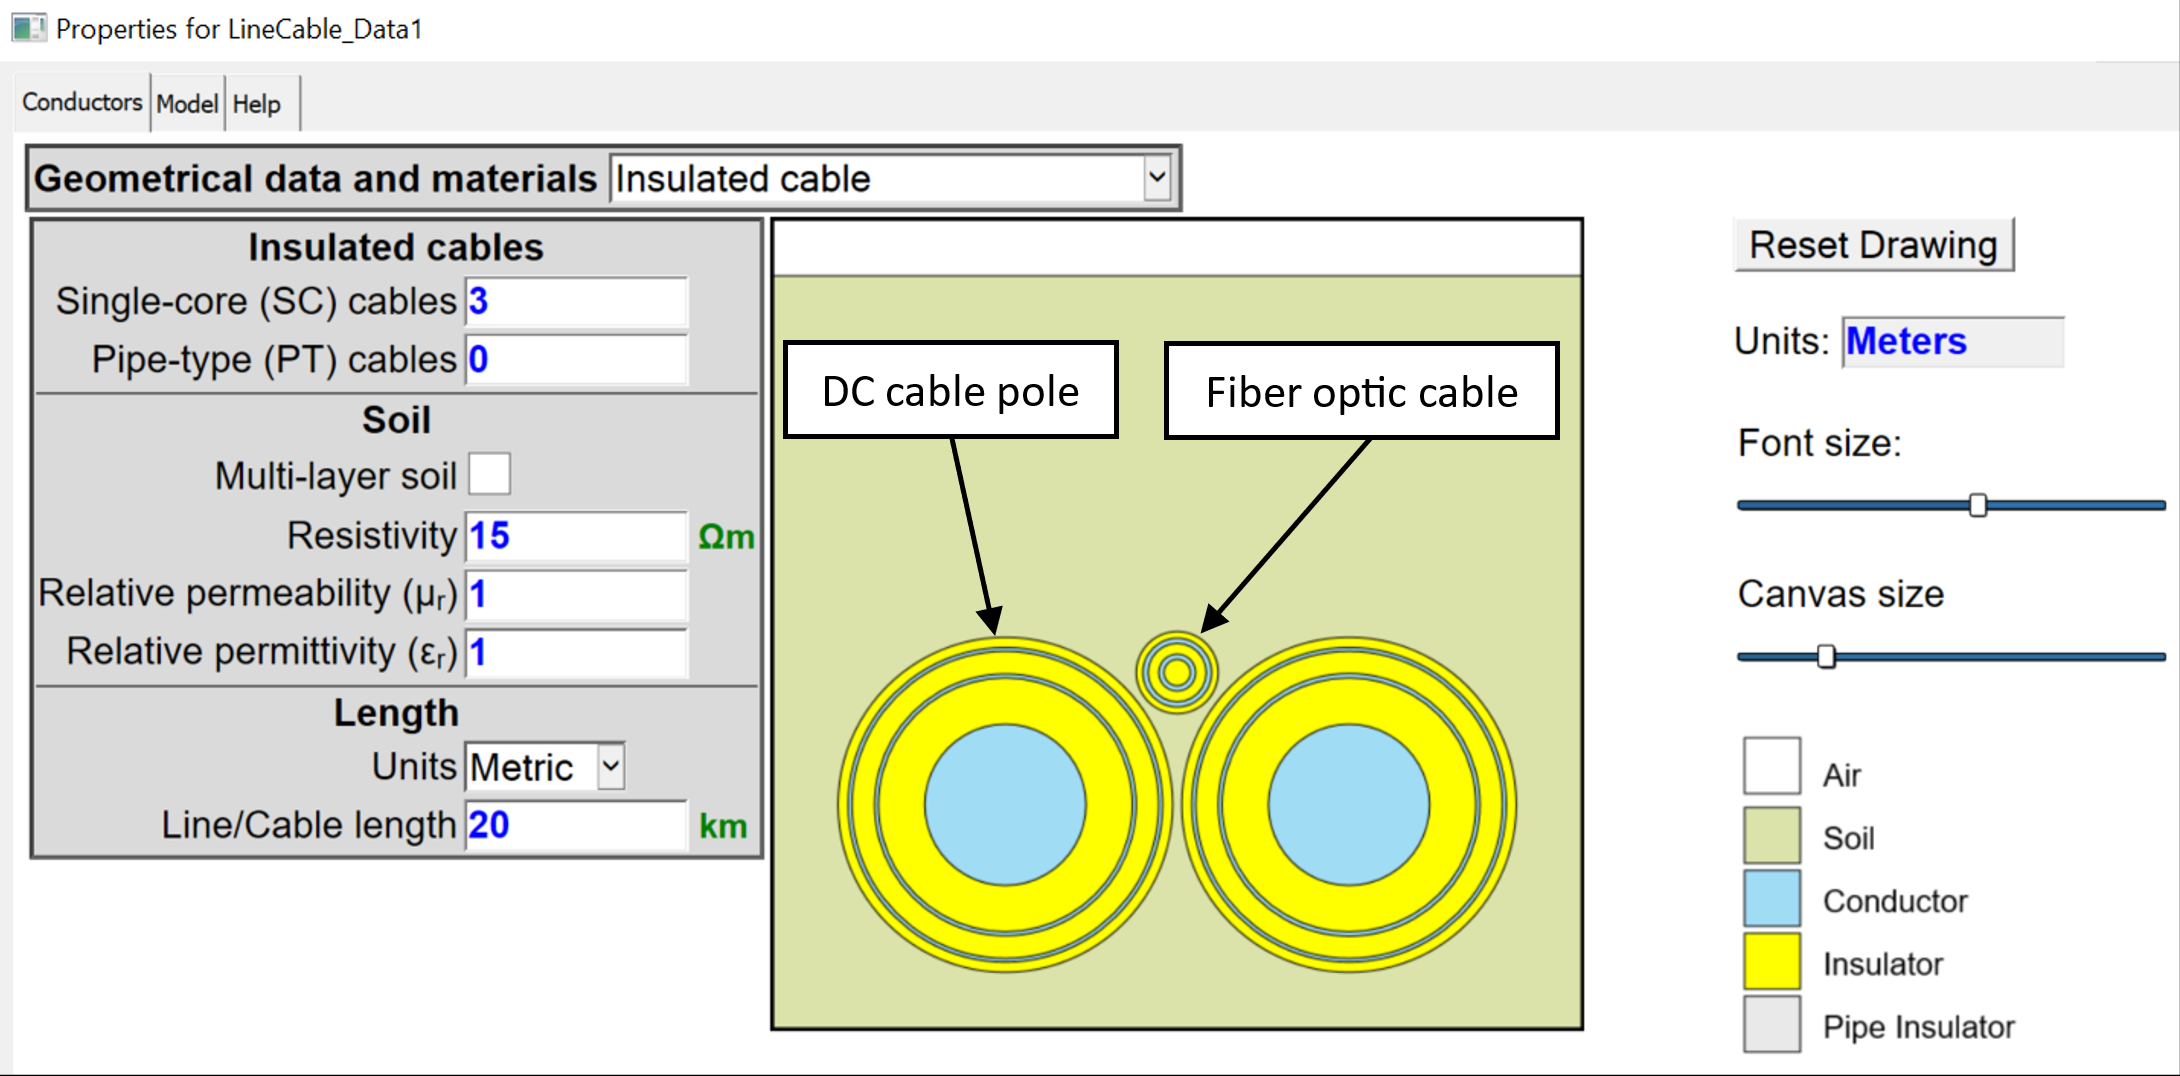 Illustration of the cross-section HVDC cable layout modeled in EMTP